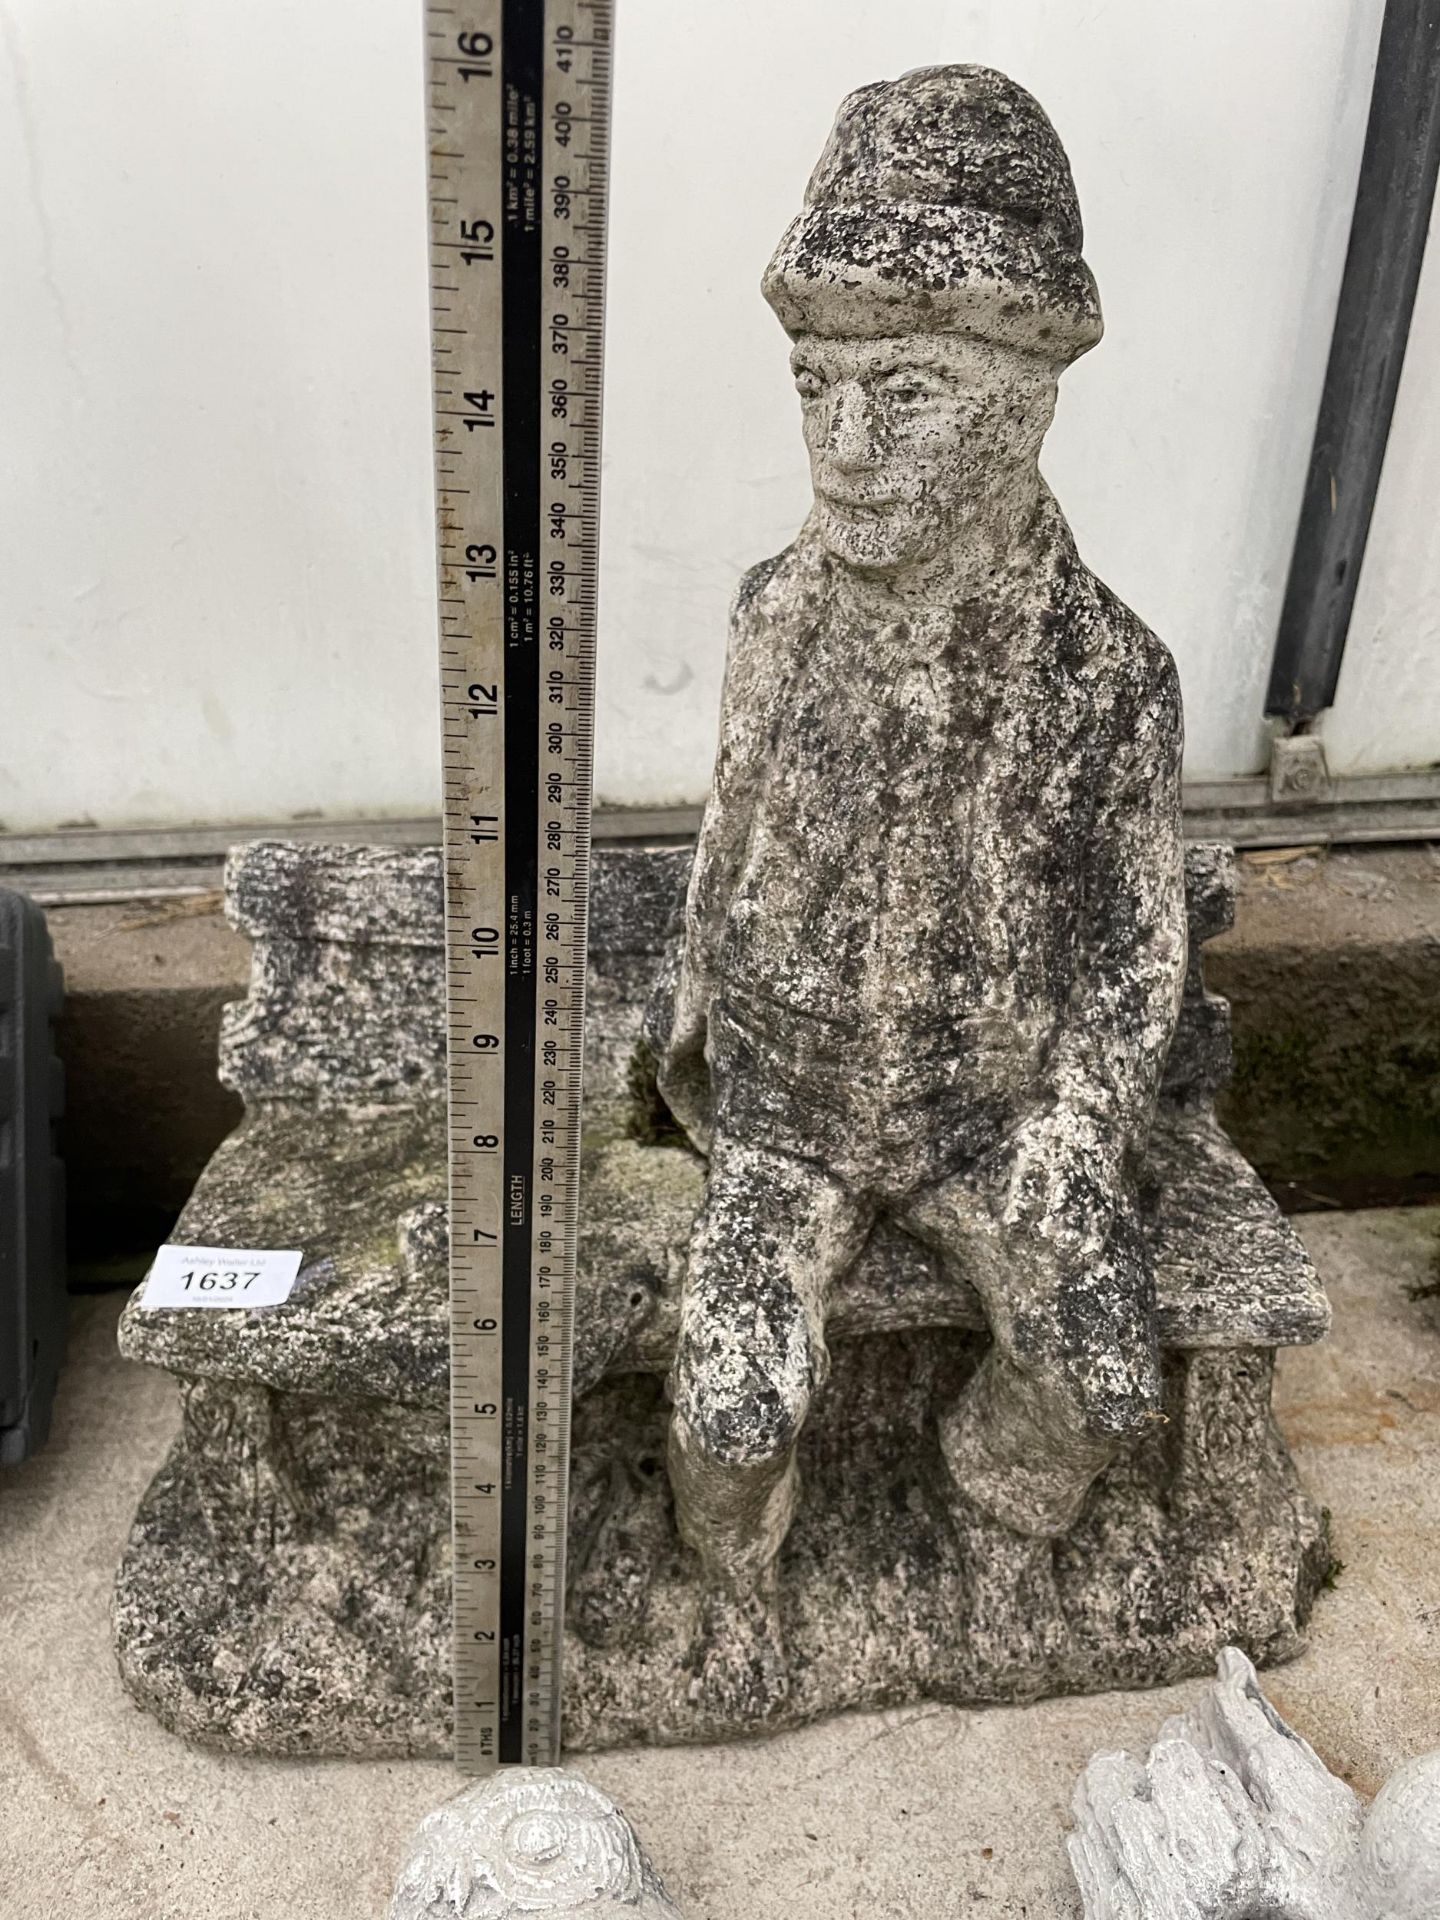 THREE CONCRETE GARDEN FIGURES TO INCLUDE A MAN SEATED ON A BENCH ETC - Image 2 of 3